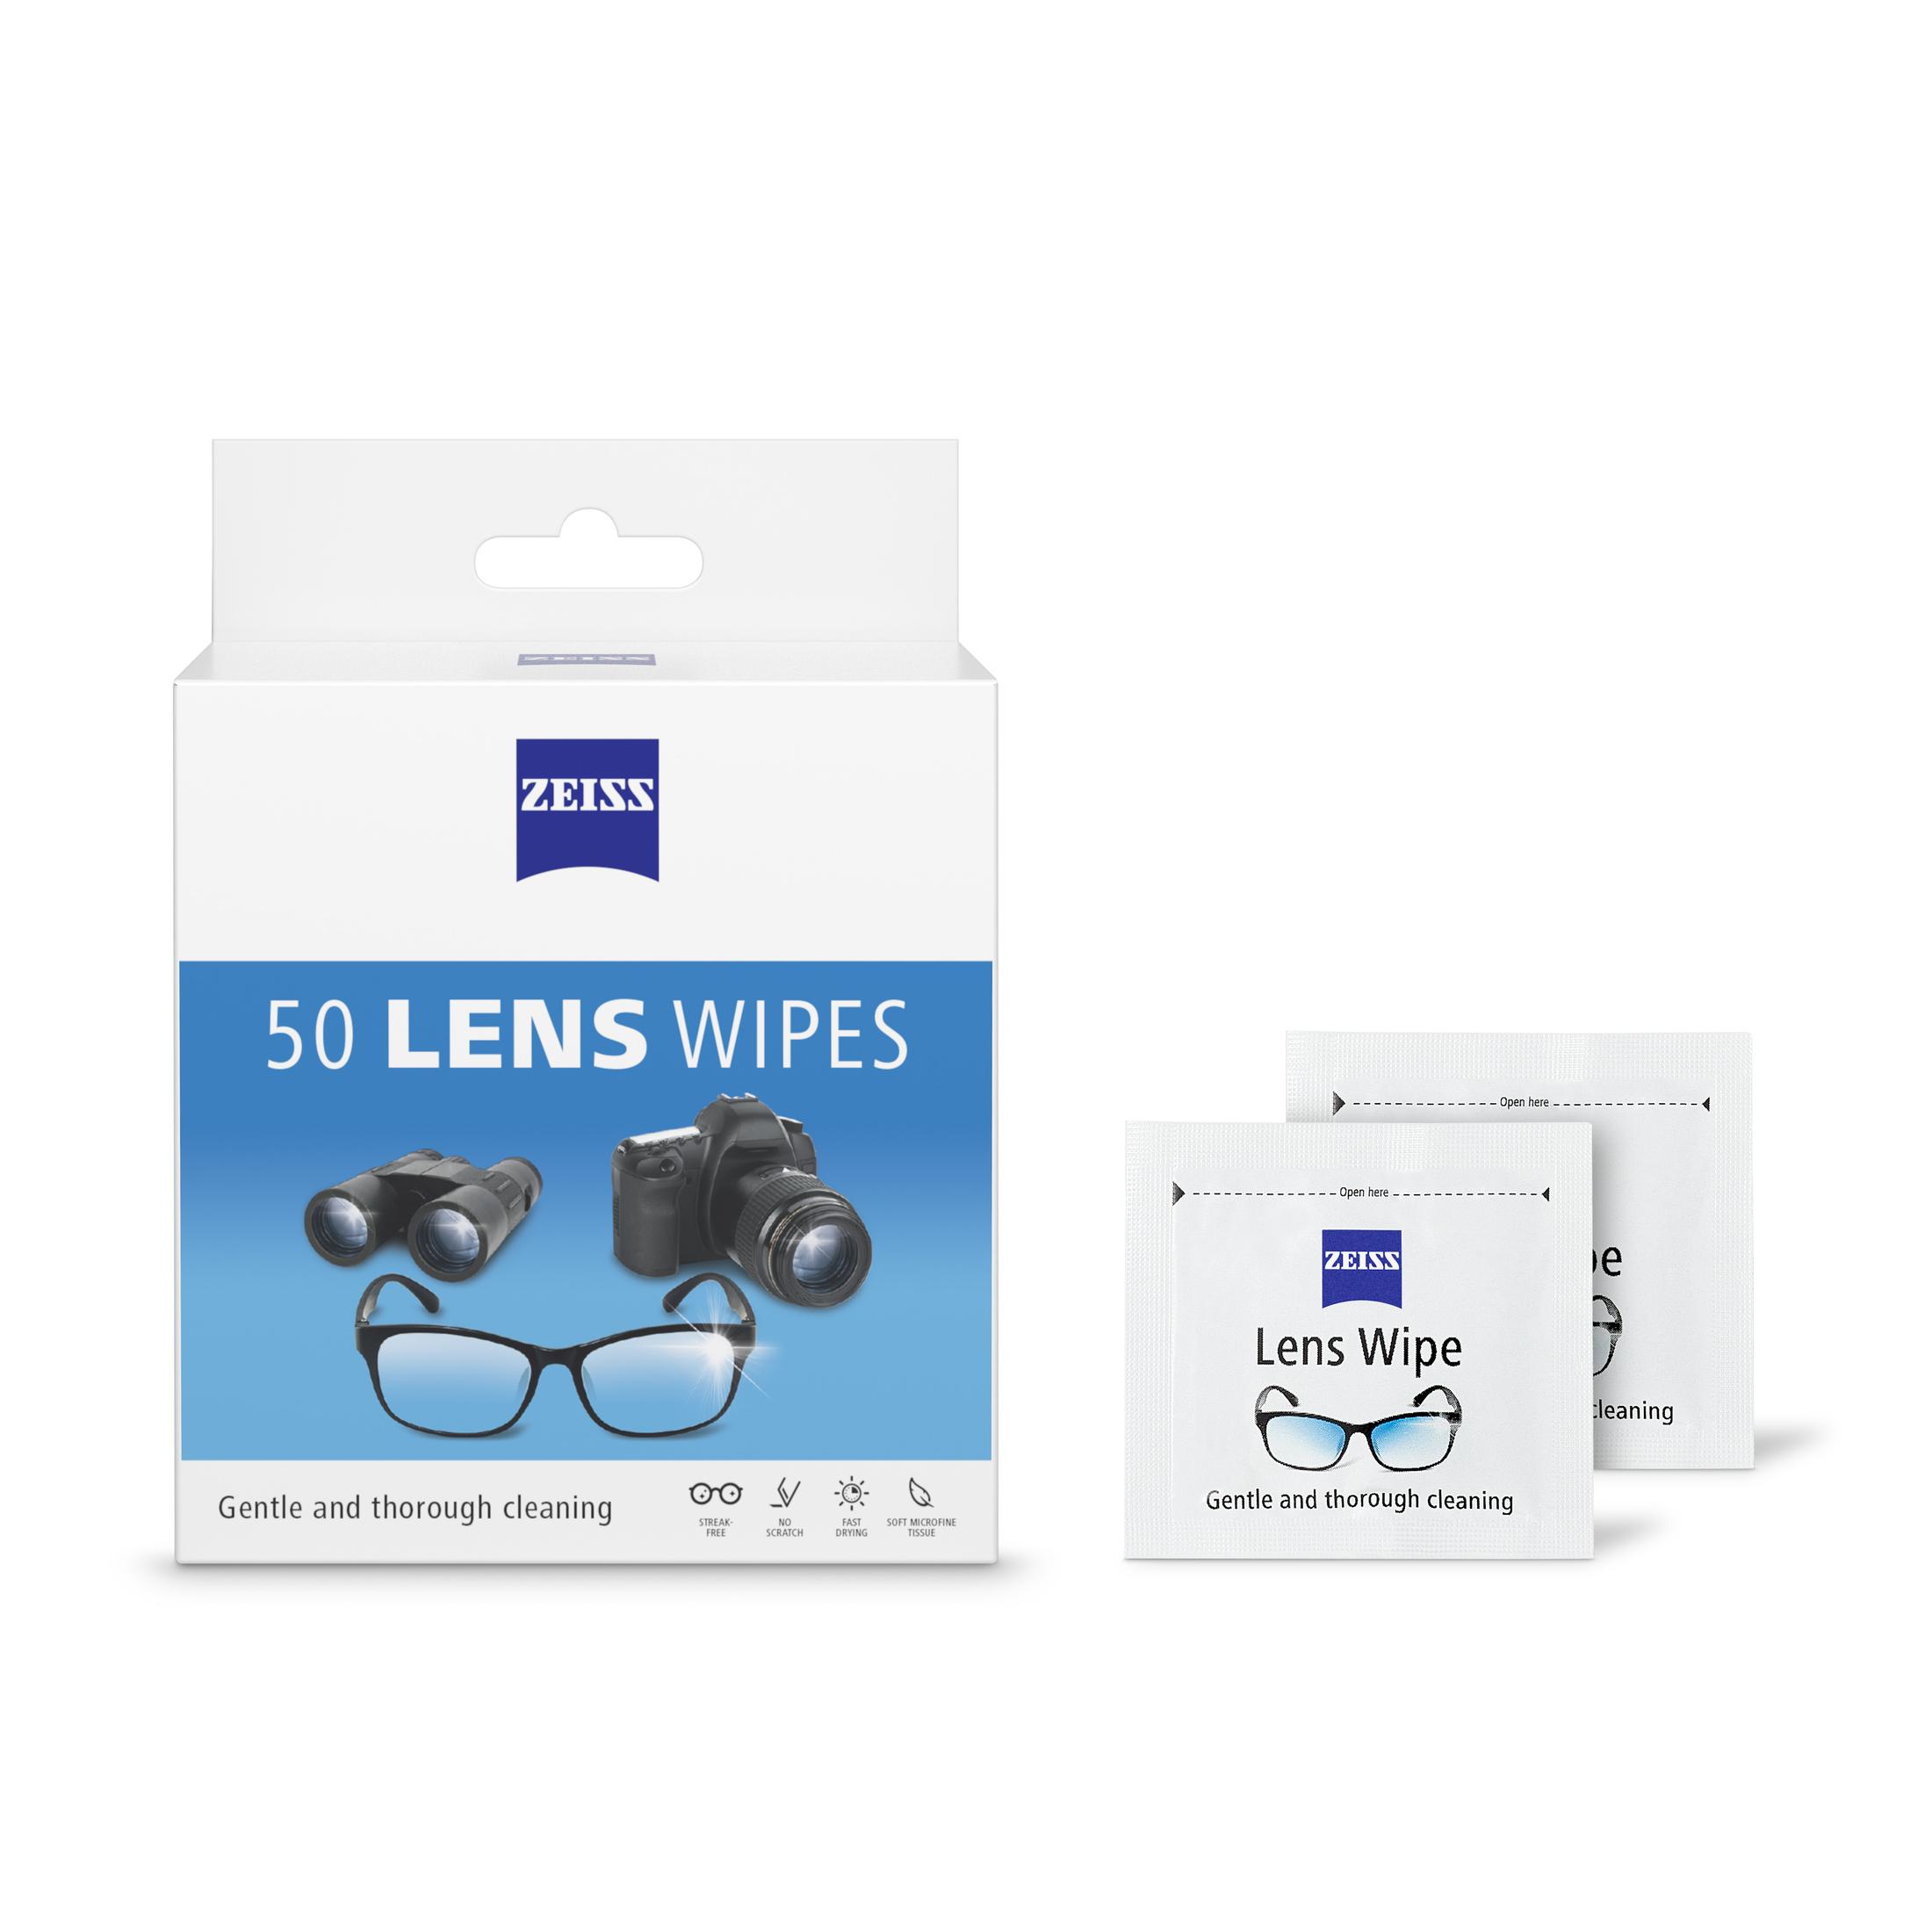 ZEISS Gentle and Thorough Cleaning Eyeglass Lens Cleaner Wipes, 50 Count - image 2 of 6